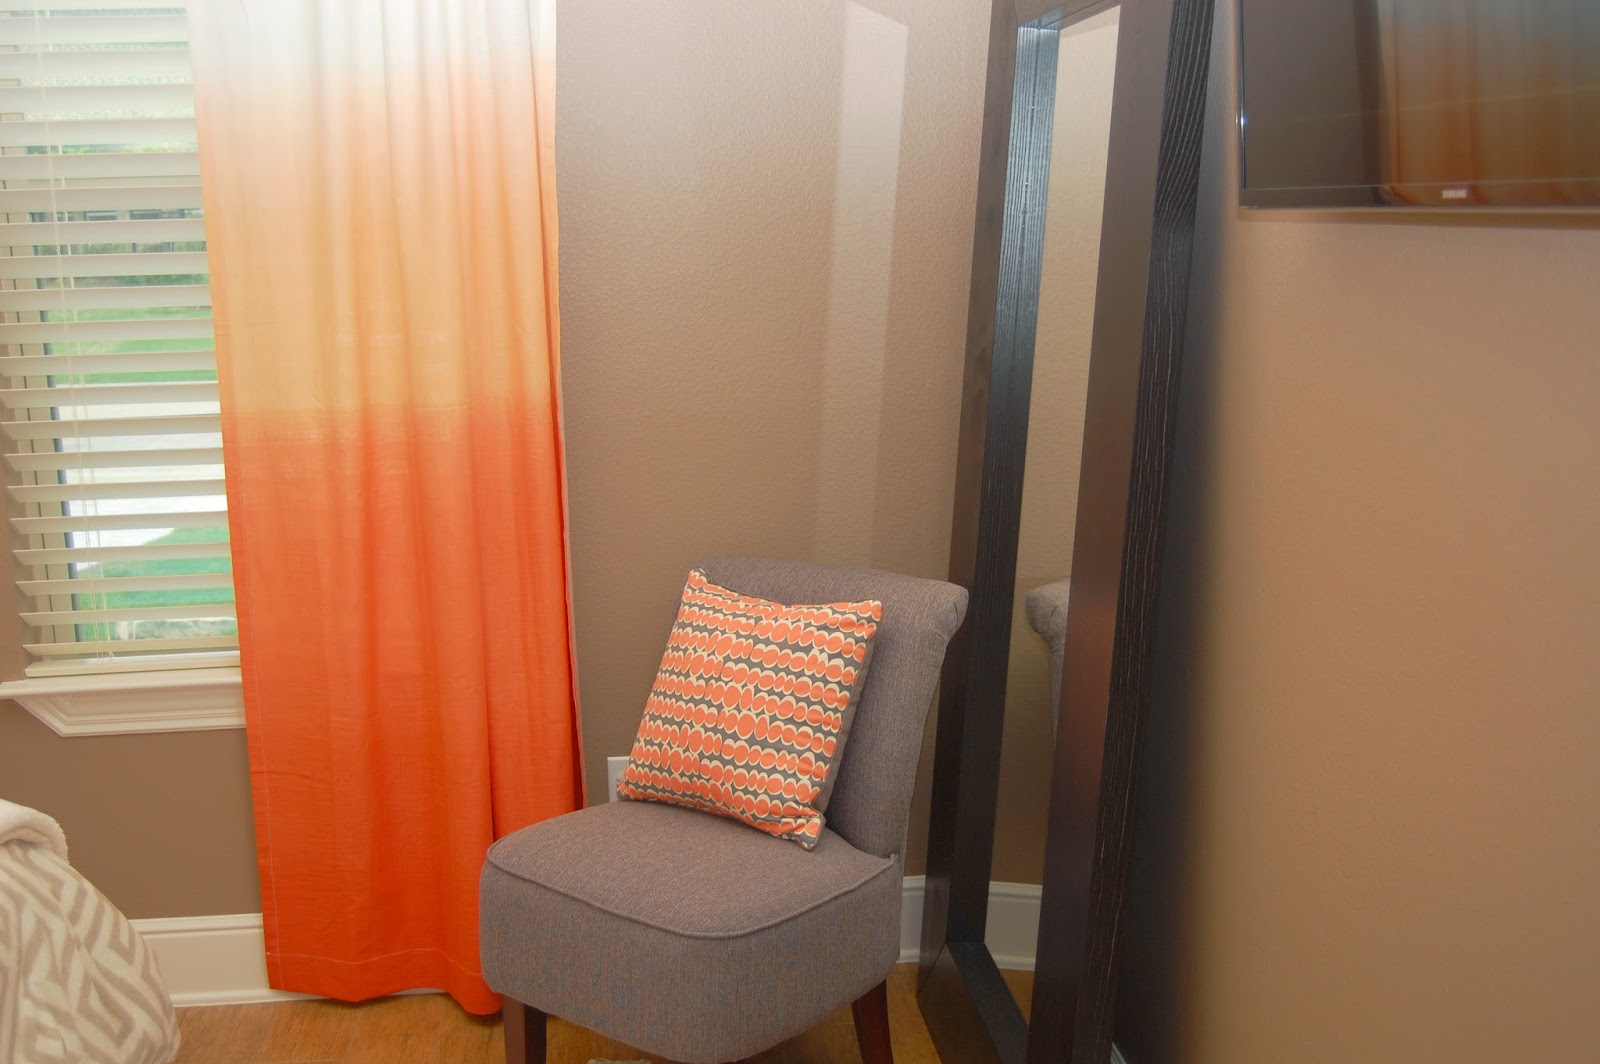 ombre curtains for living room